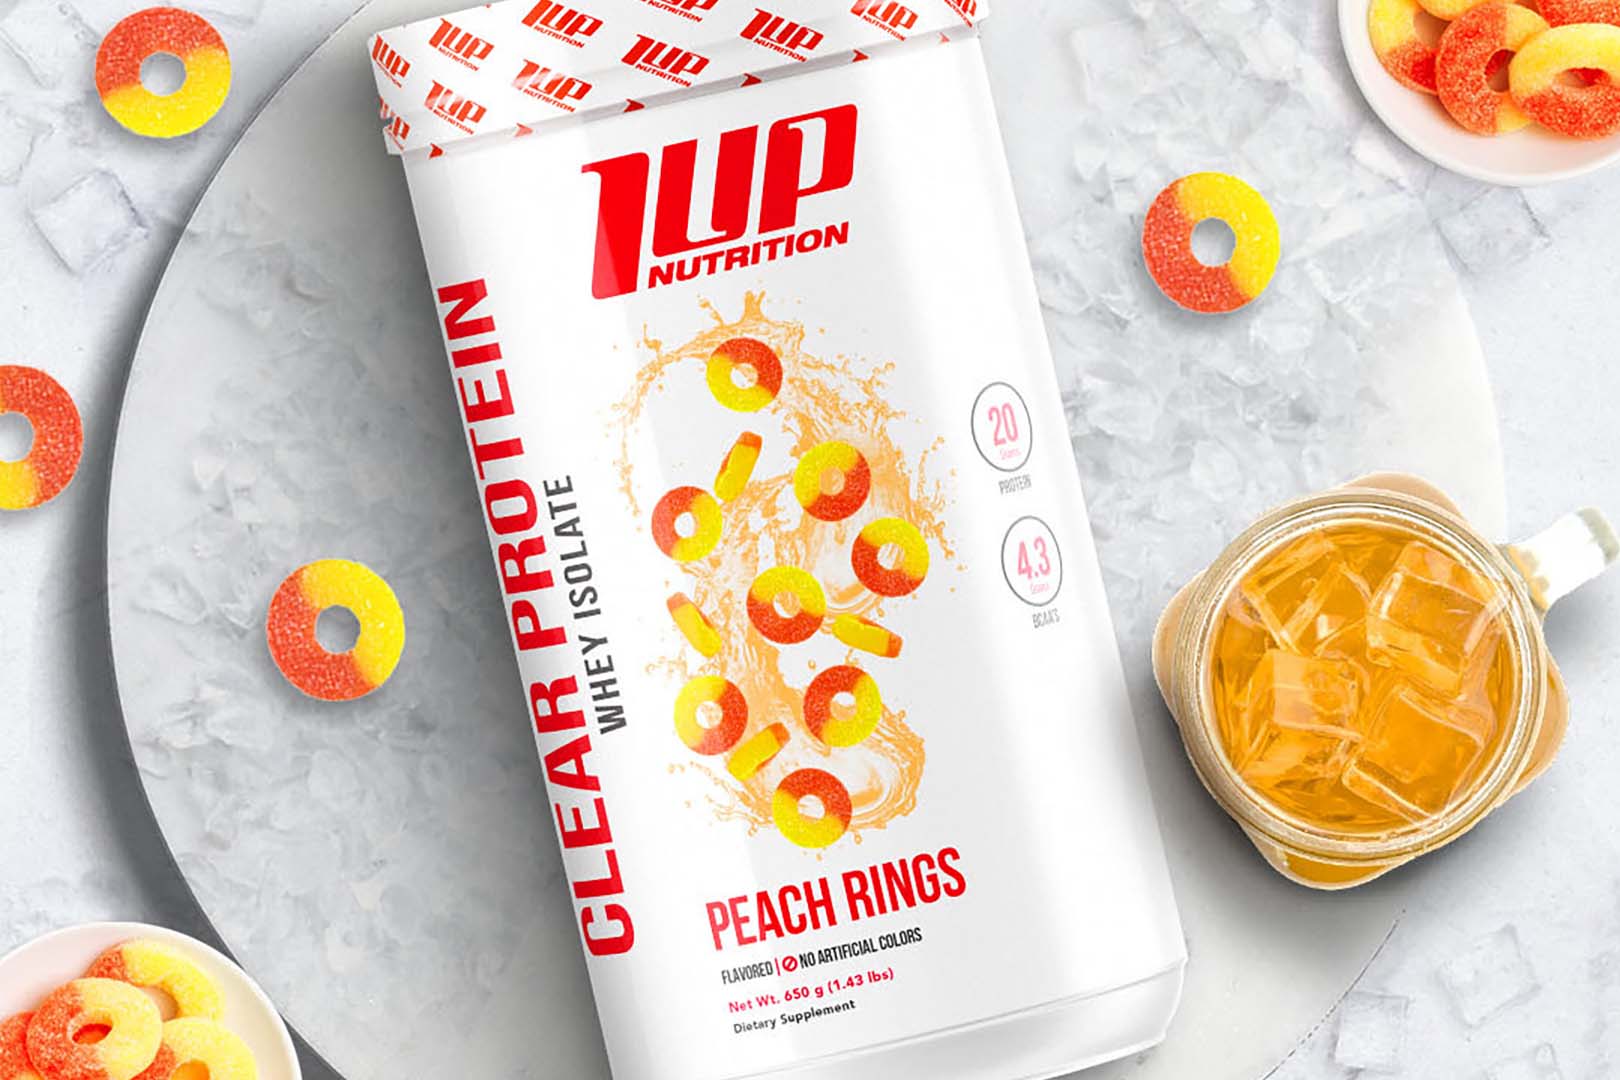 Peach Rings 1 Up Clear Protein